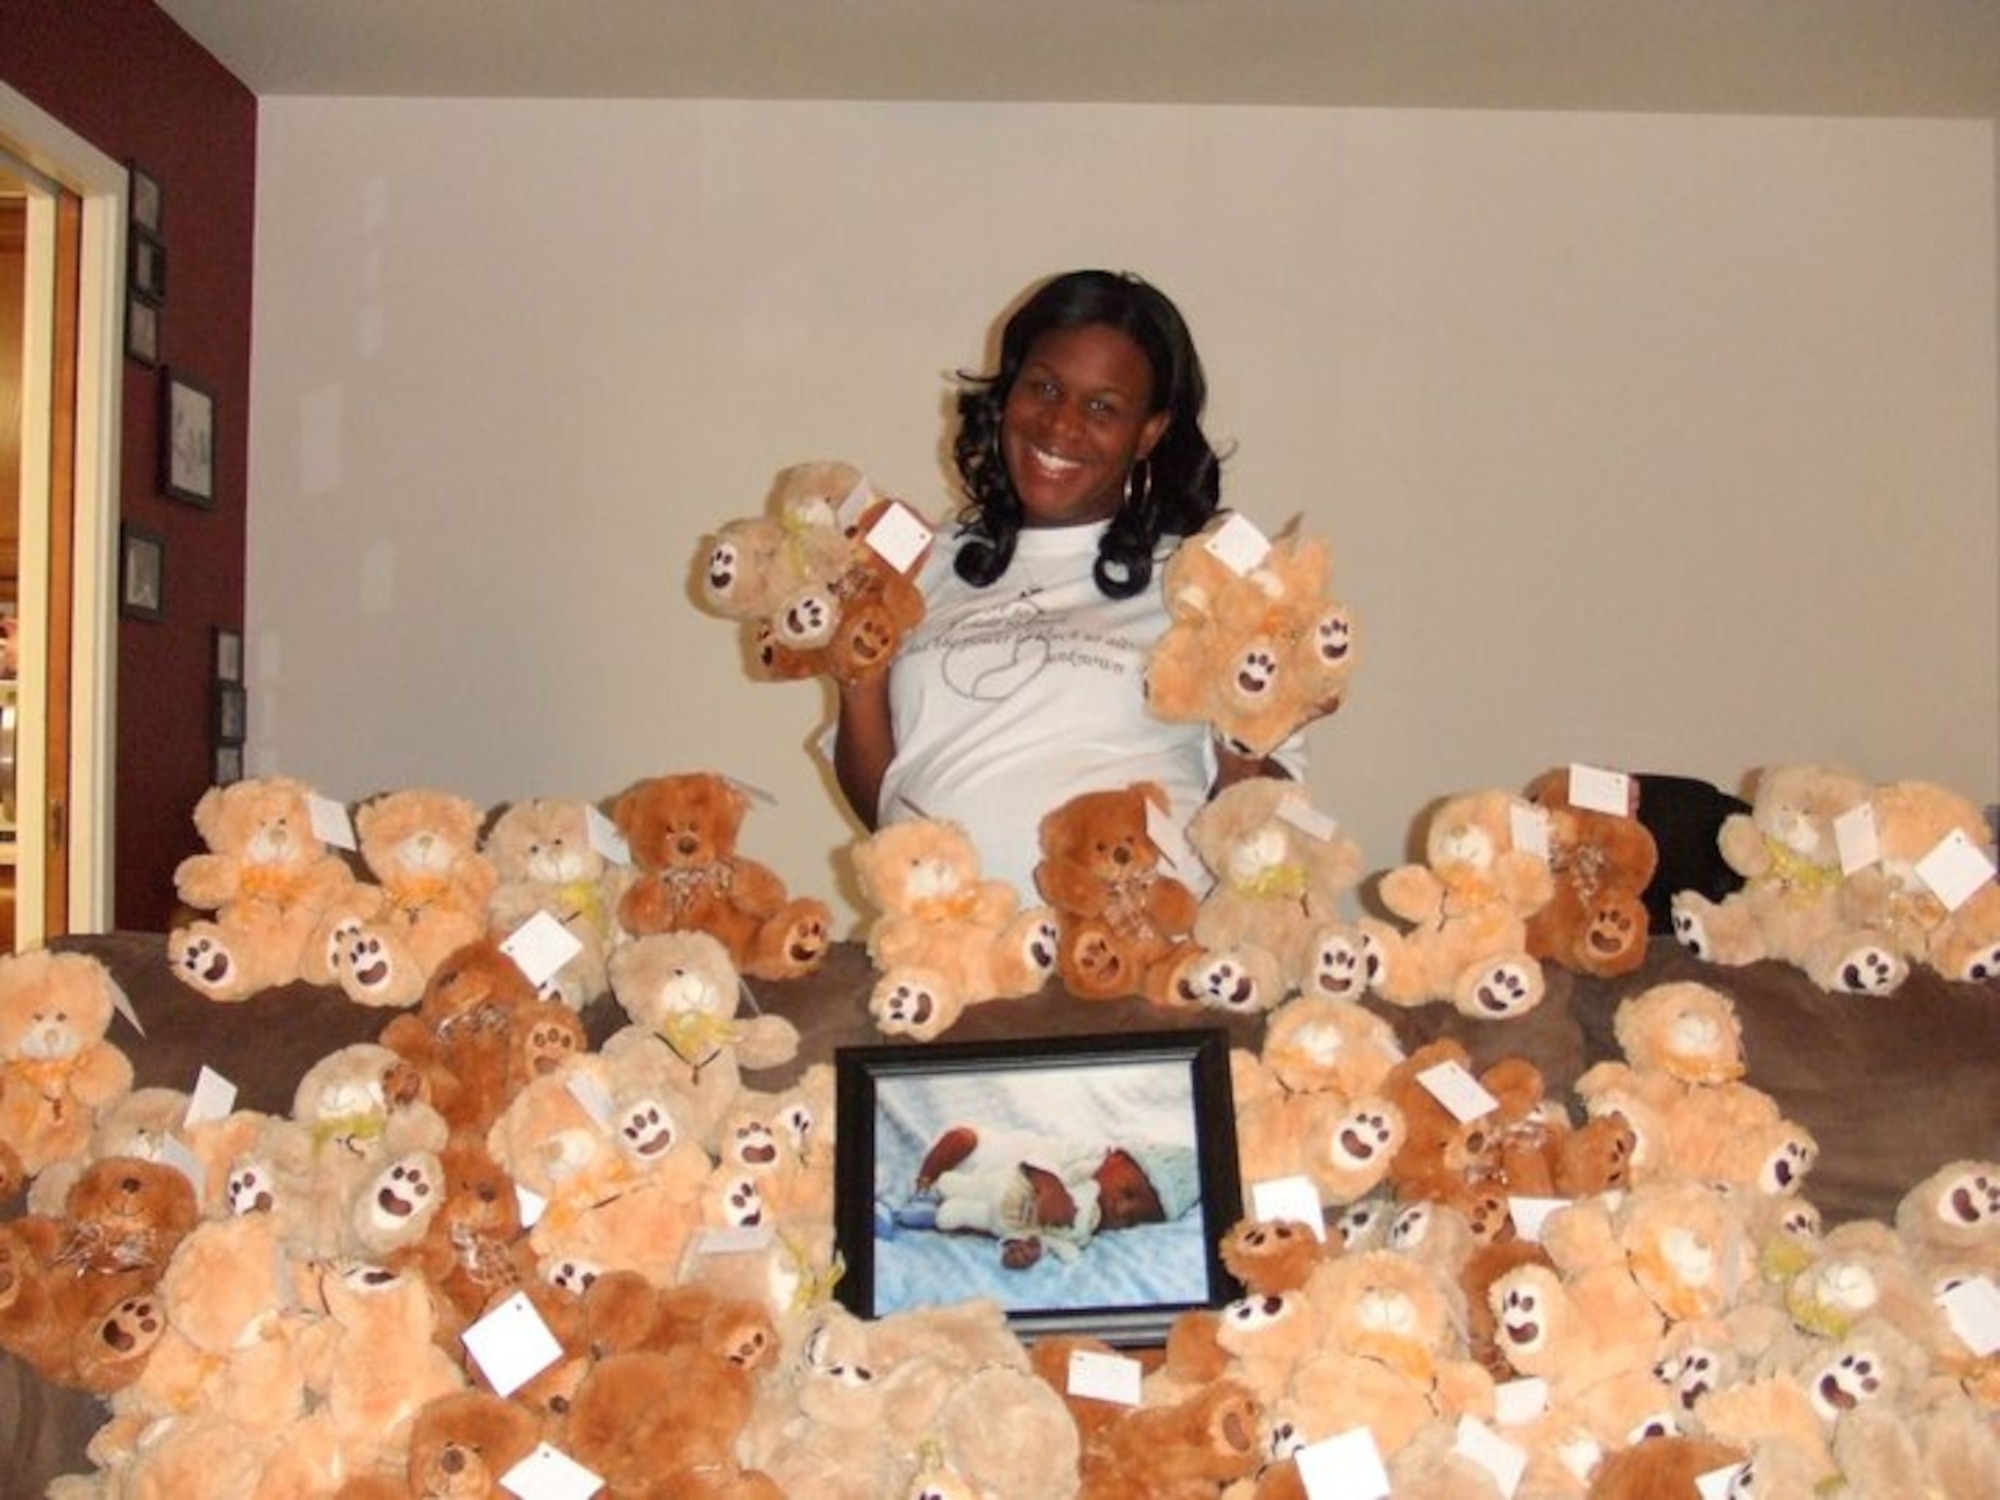 Stephanie Stewart, wife of 552nd Air Control Wing Staff Sgt. Van Stewart, poses with some of the 345 “Angel Bears” she donated to a metro-area hospital from her “My Very Own Angel”?organization. Nestled in the middle of the bears, is a picture of the Stewart’s son Vayden. Vayden died nearly four hours after he was born due to a lower urinary tract obstruction that stopped the development of some of his organs, including his lungs, and hardened his kidneys. Ms. Stewart started the organization to provide resources and support to women and families who have made the decision to carry to term a child with a fatal diagnosis. “I want these women to be able to enjoy their pregnancy and their child the same way anyone else would,” she said. (Courtesy photo)